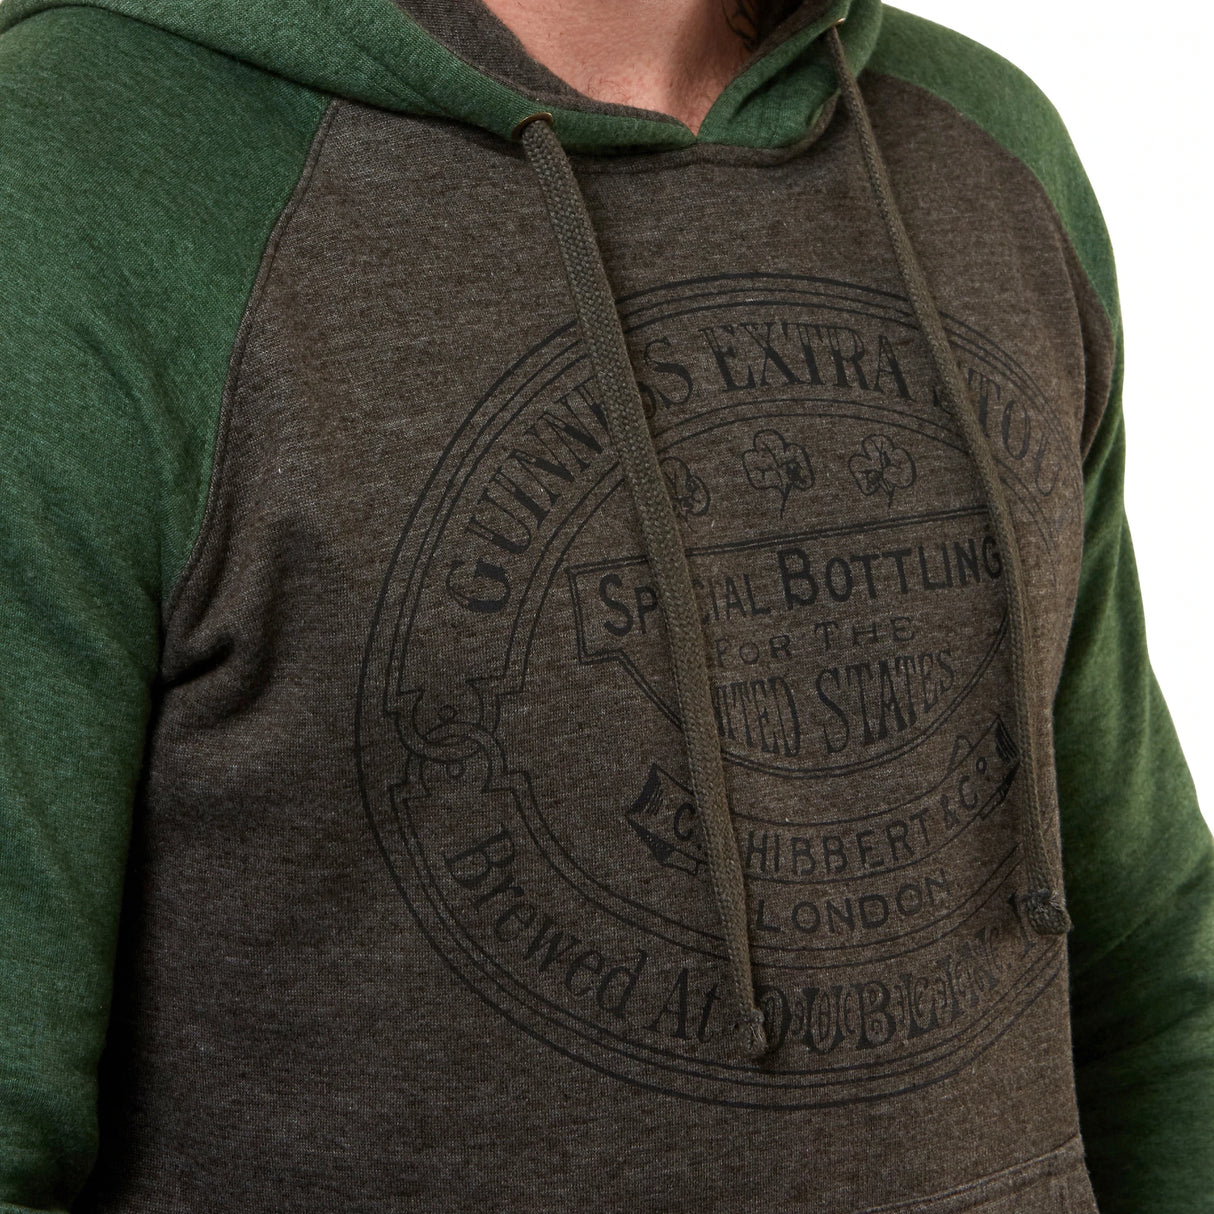 Guinness Grey and Green Hoodie